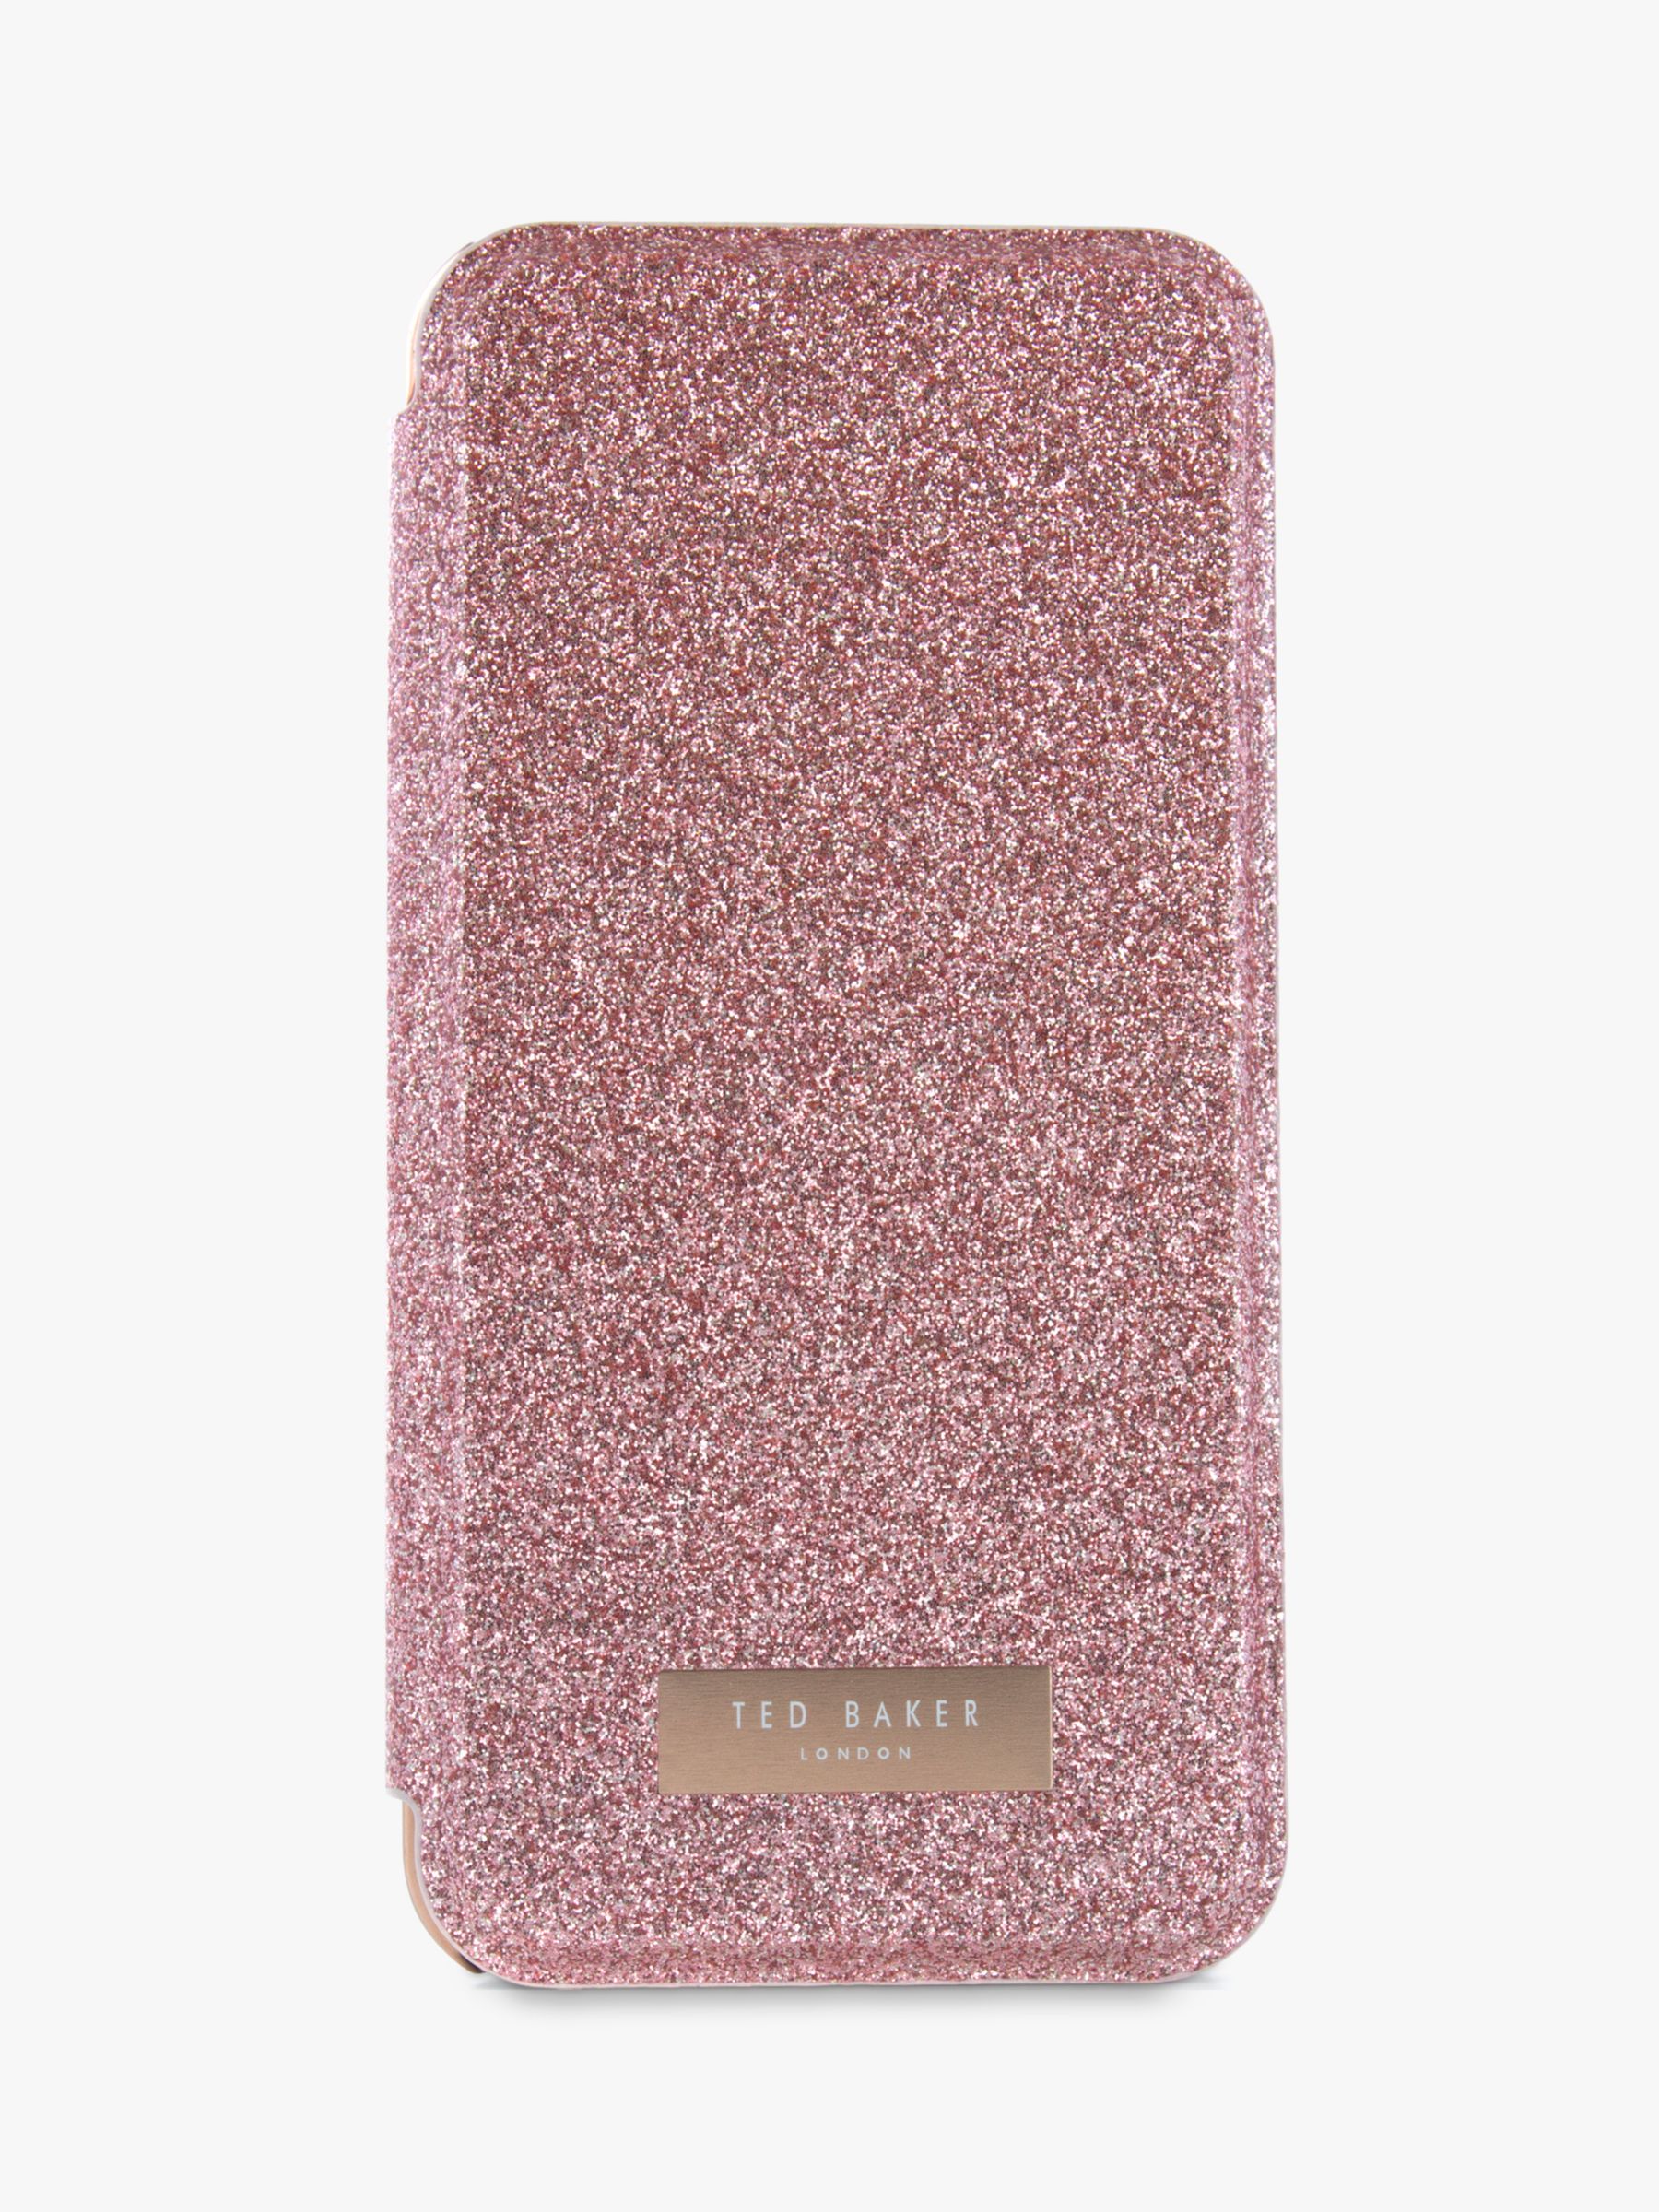 Ted Baker GLITSIE Mirror Folio Case for iPhone 6/7 and 8, Rose Gold at